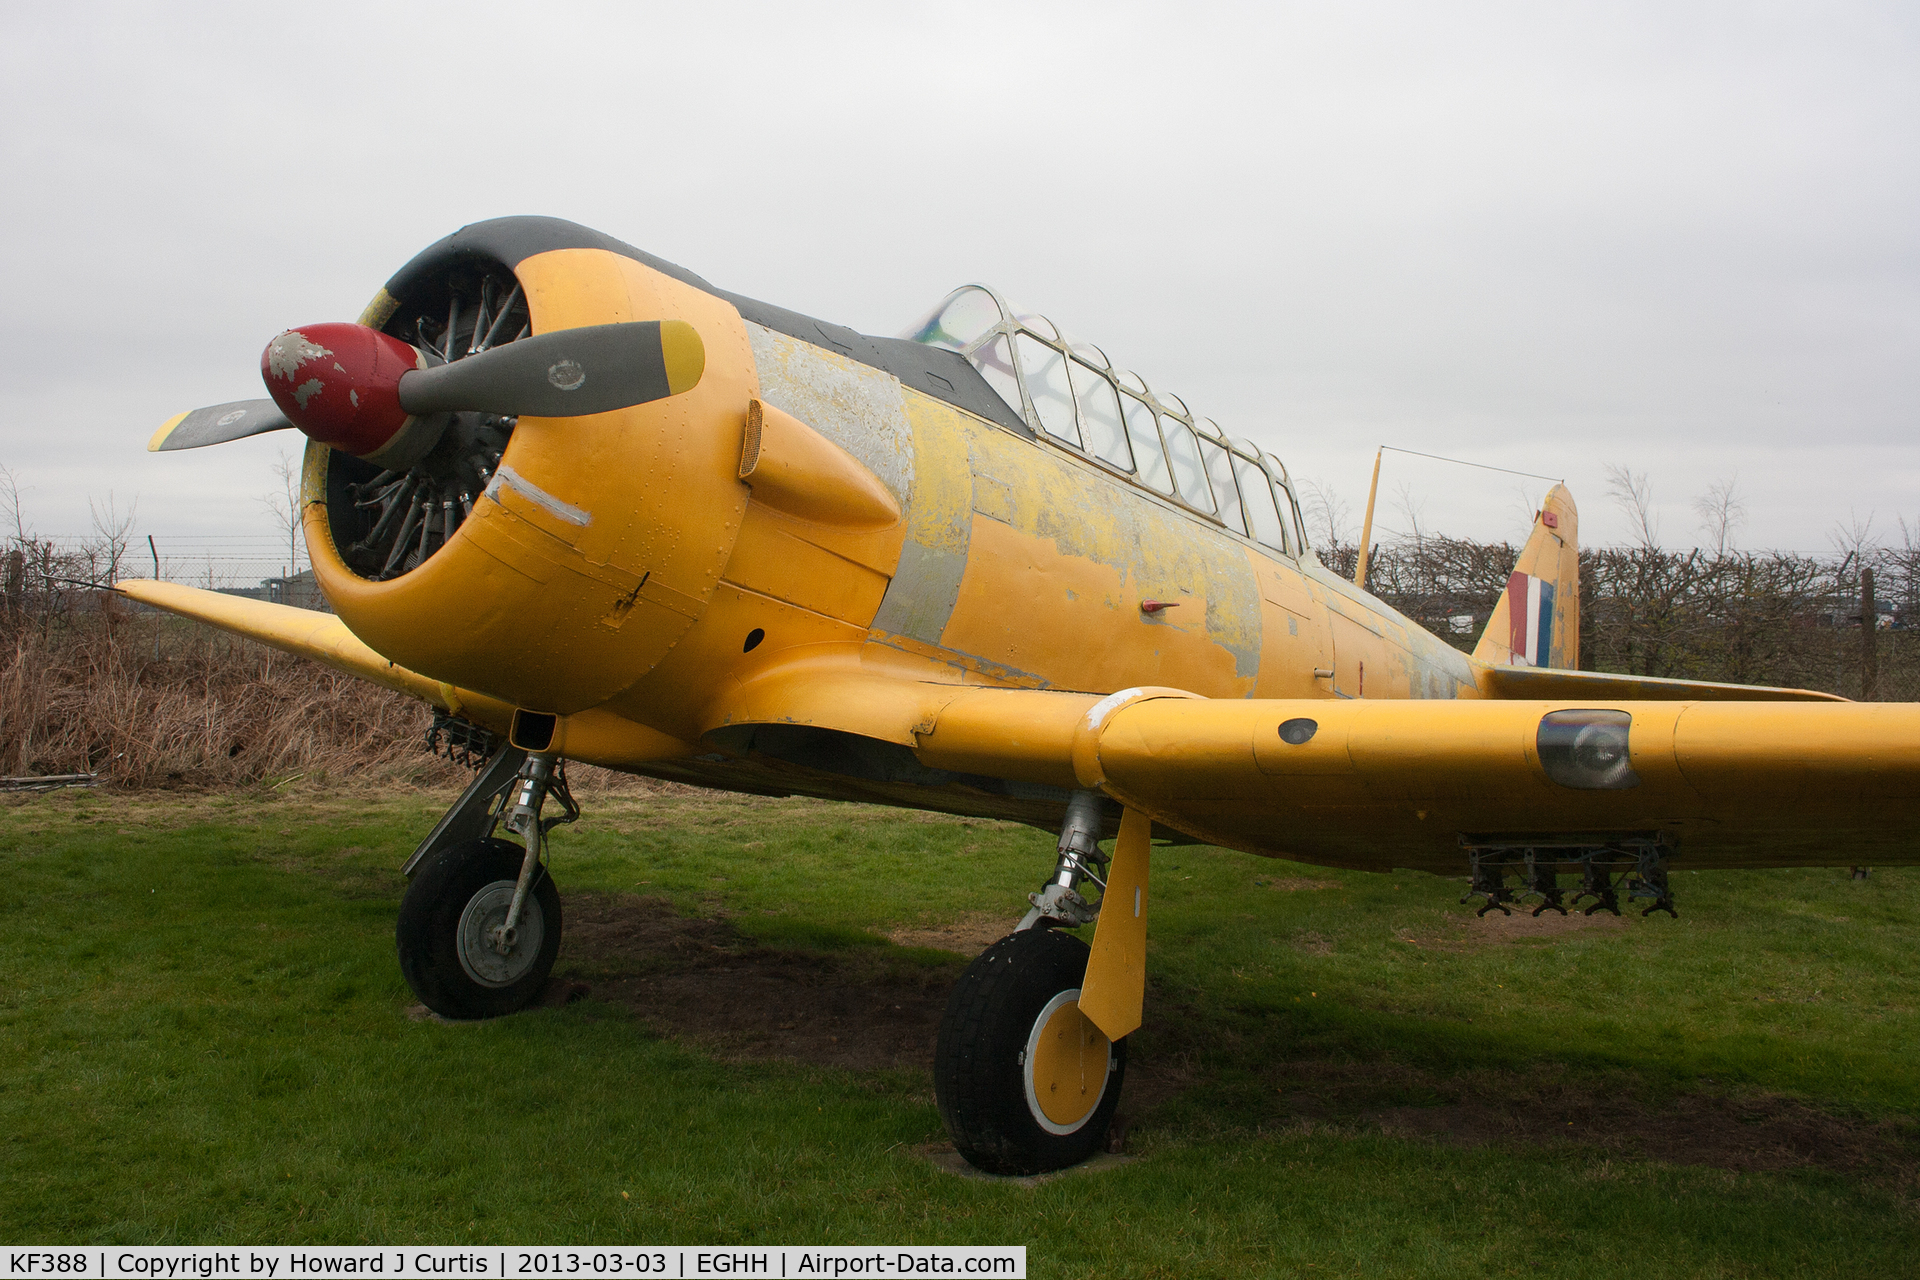 KF388, North American Harvard IIB C/N Composite, On display at the Bournemouth Aviation Museum. Currently undergoing repainting.